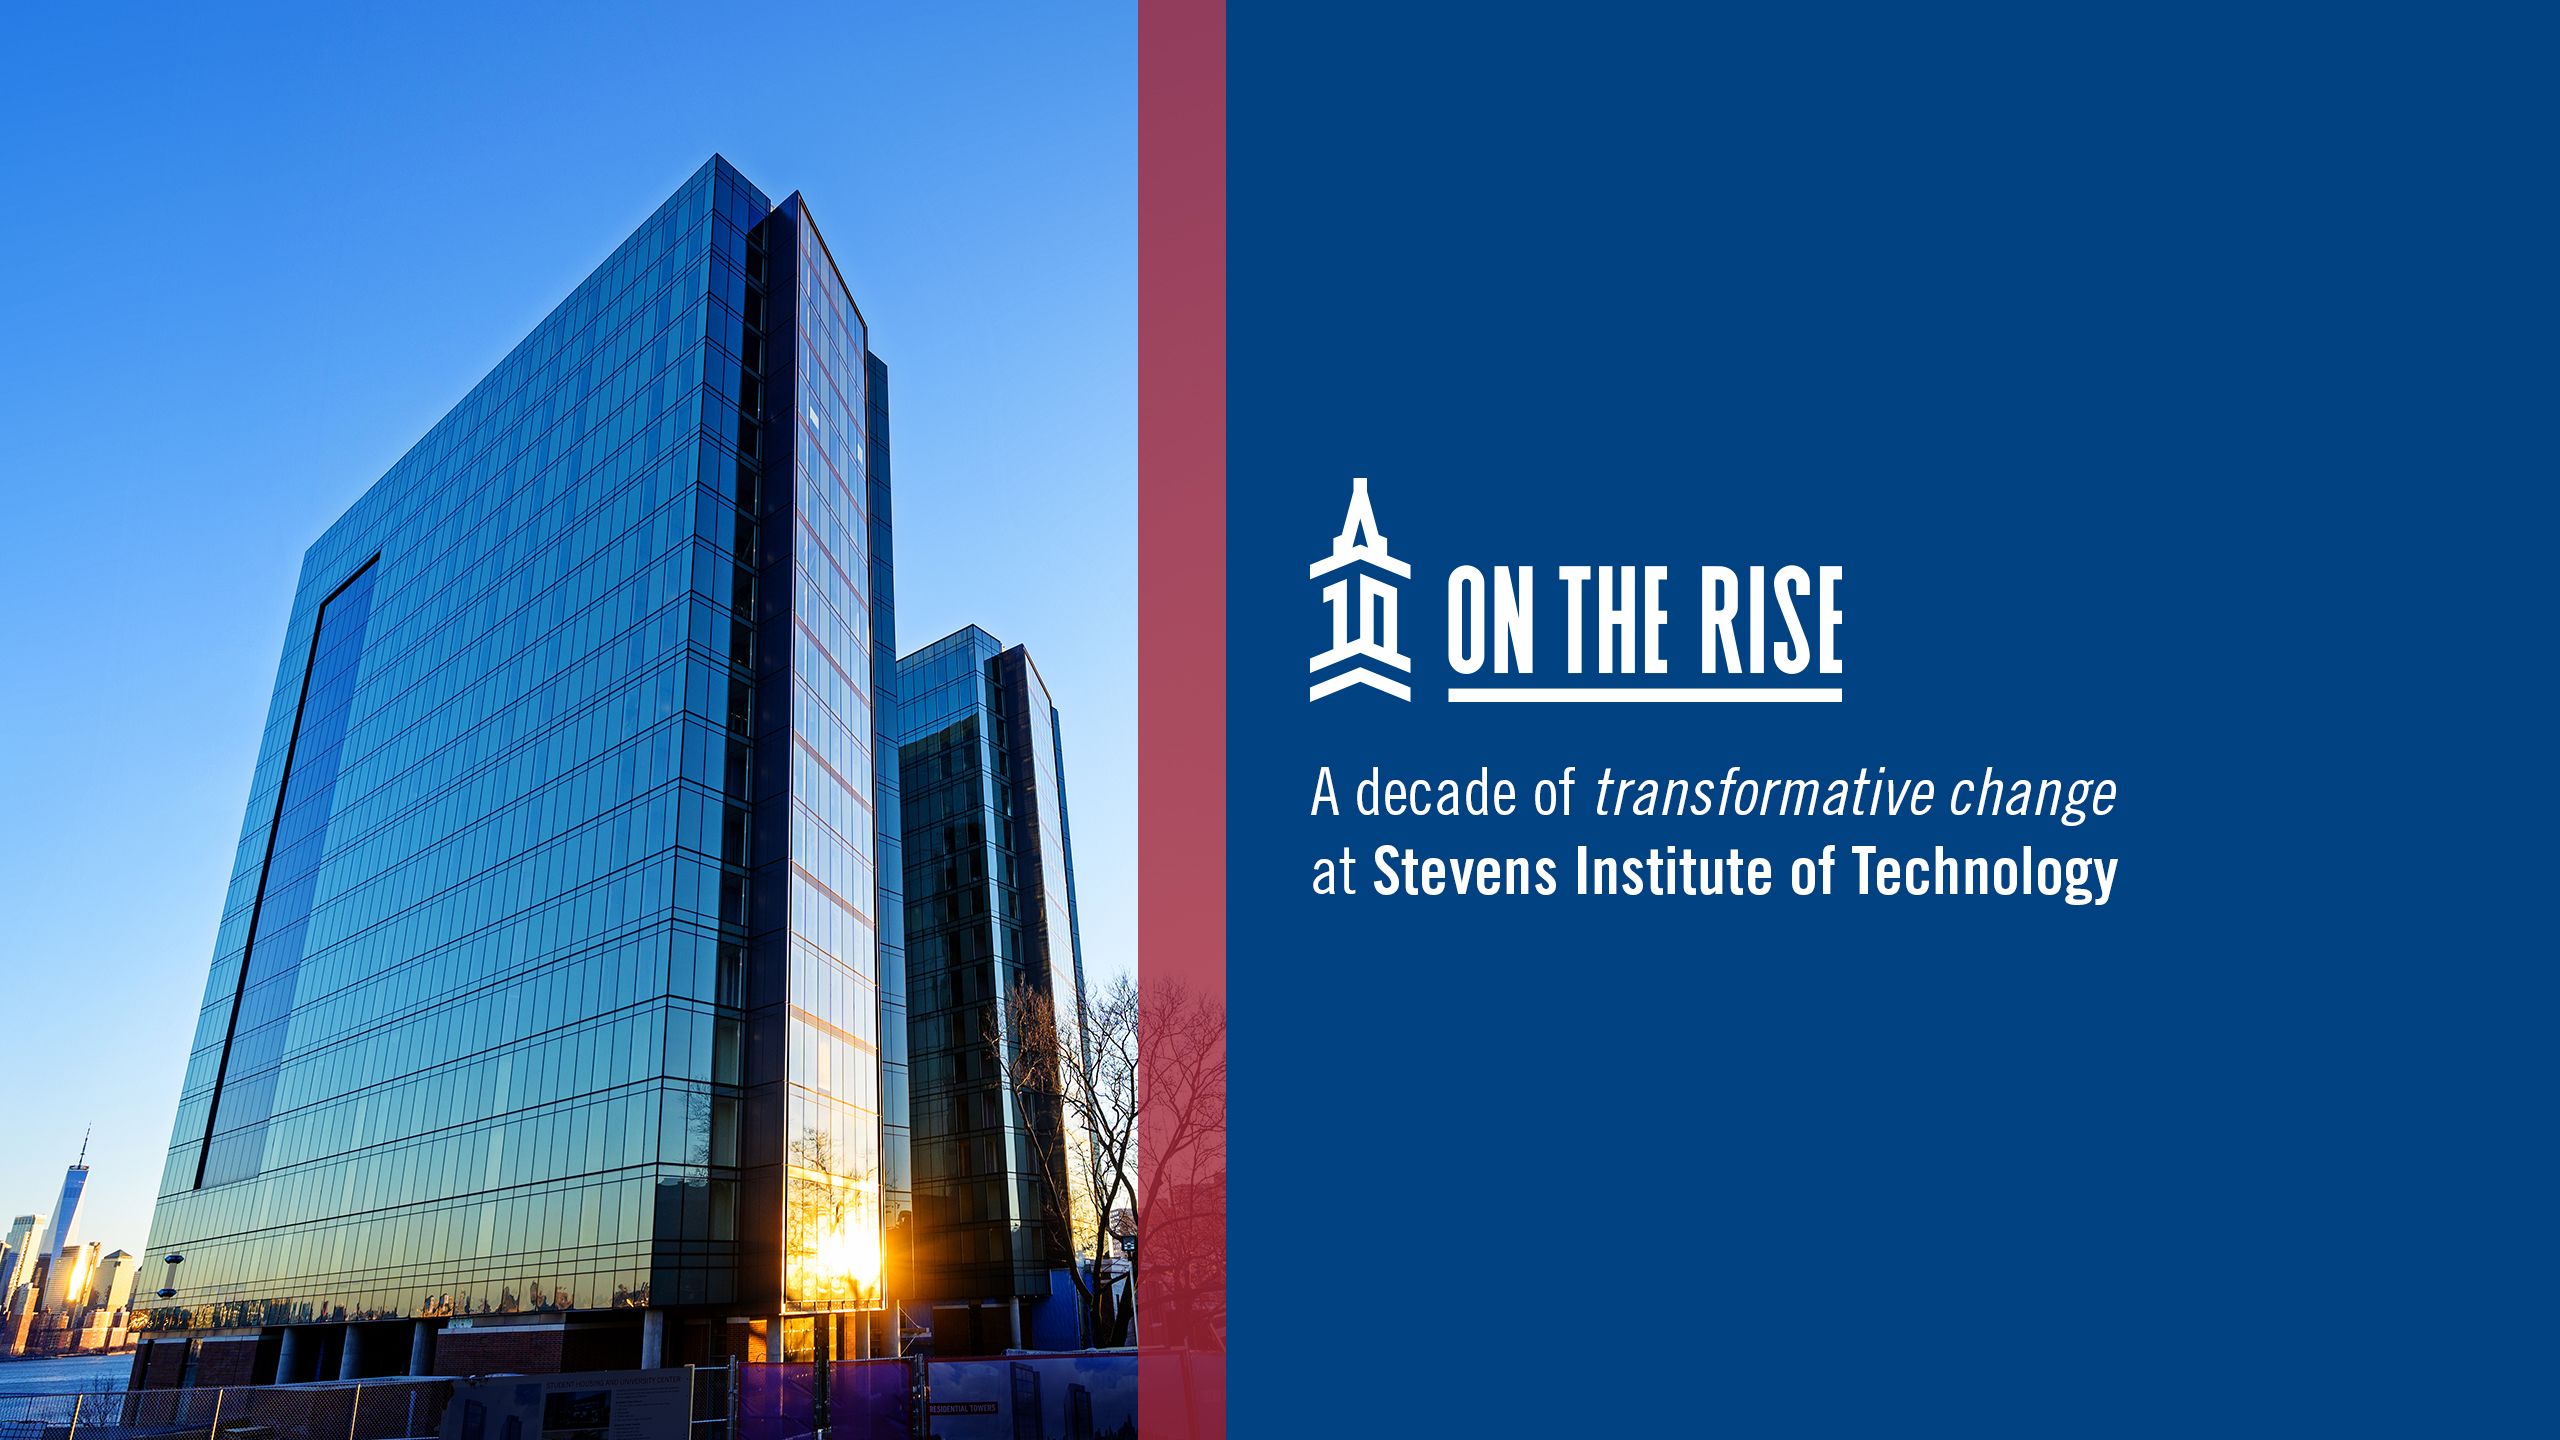 On the Rise: A decade of transformative change at Stevens Institute of Technology